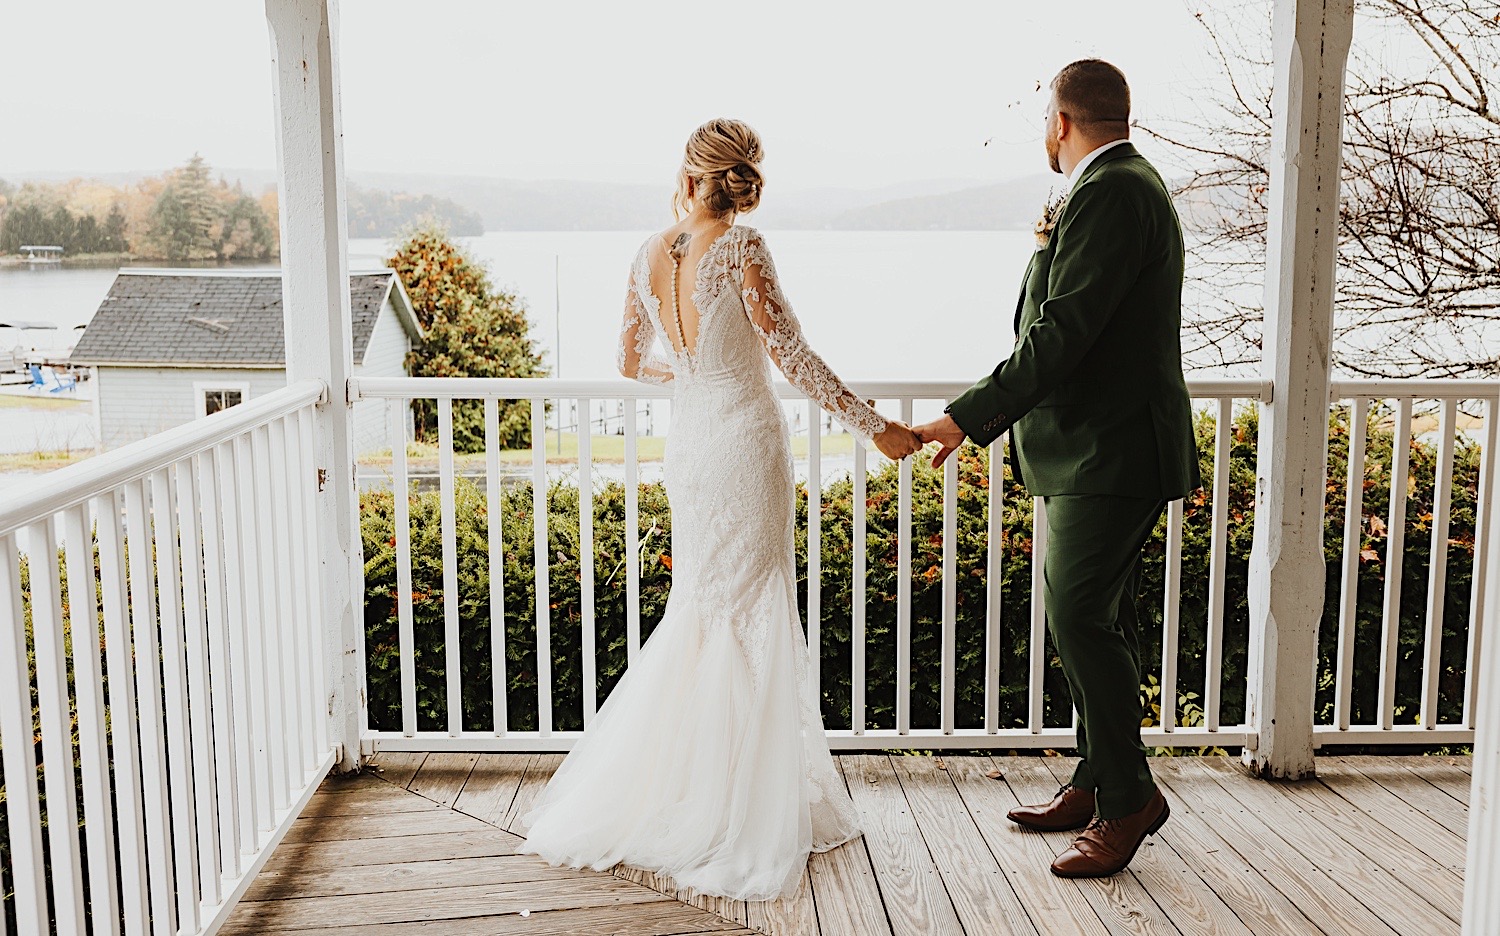 A bride and groom hold hands while looking out at Lake Bomoseen from the front porch of a house